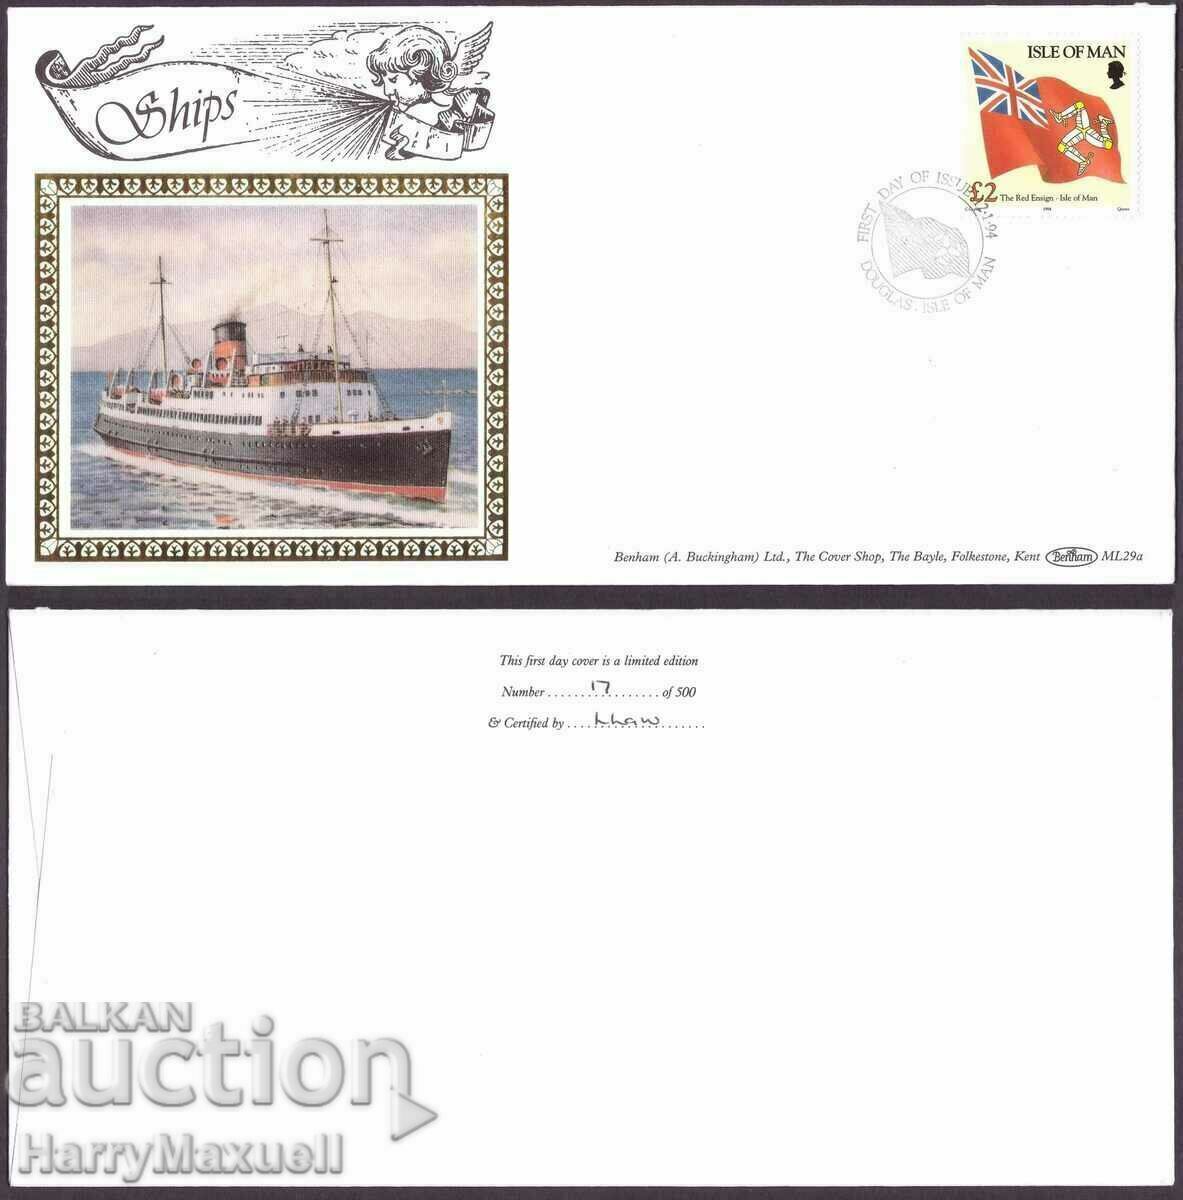 FDC First Day Envelope (FDC) Isle of Man 1994 Ship